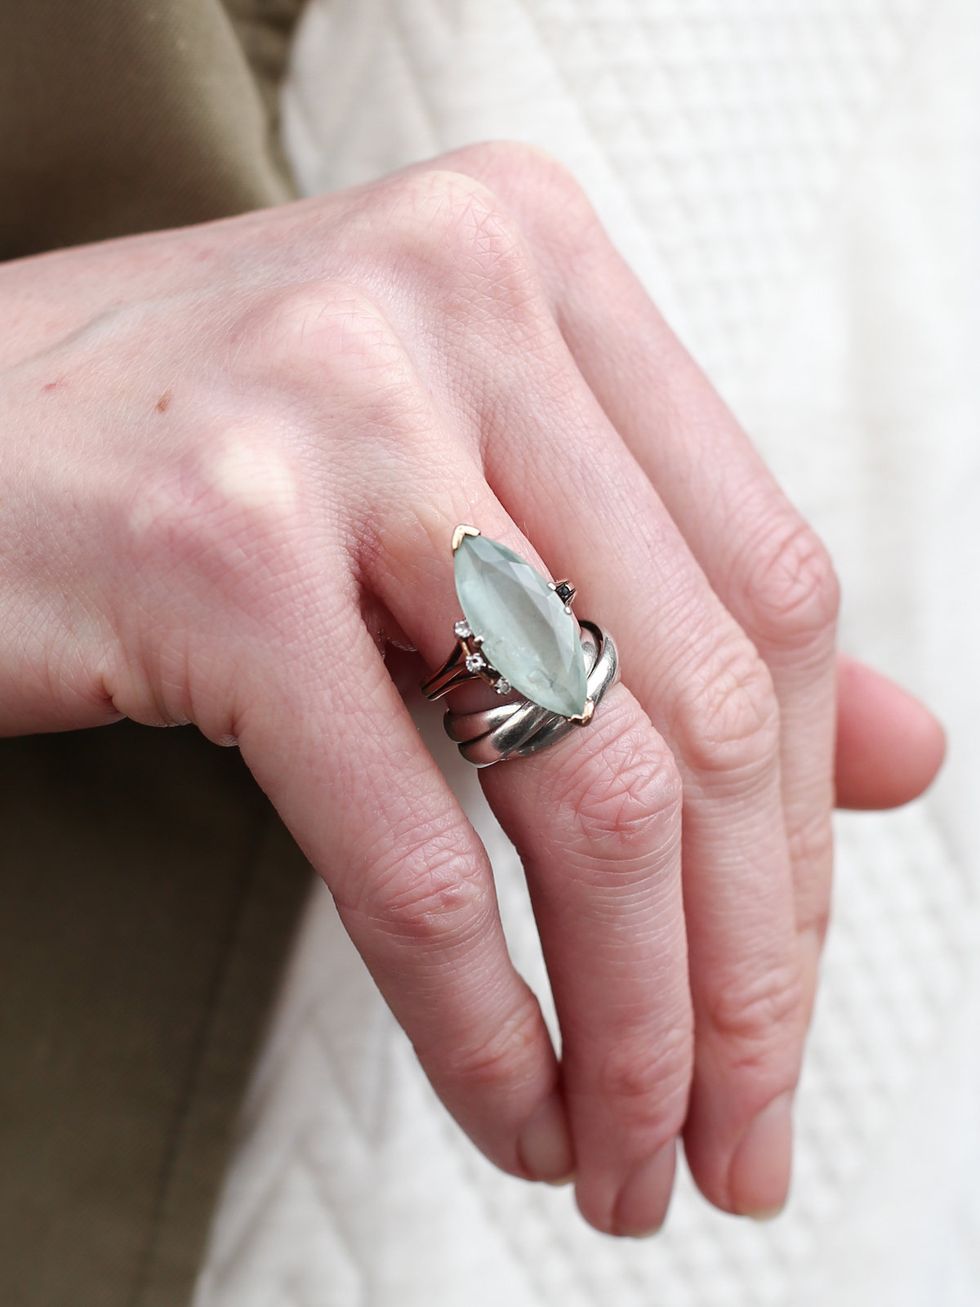 Finger, Skin, Hand, Nail, Jewellery, Thumb, Photography, Silver, Gesture, Ring, 